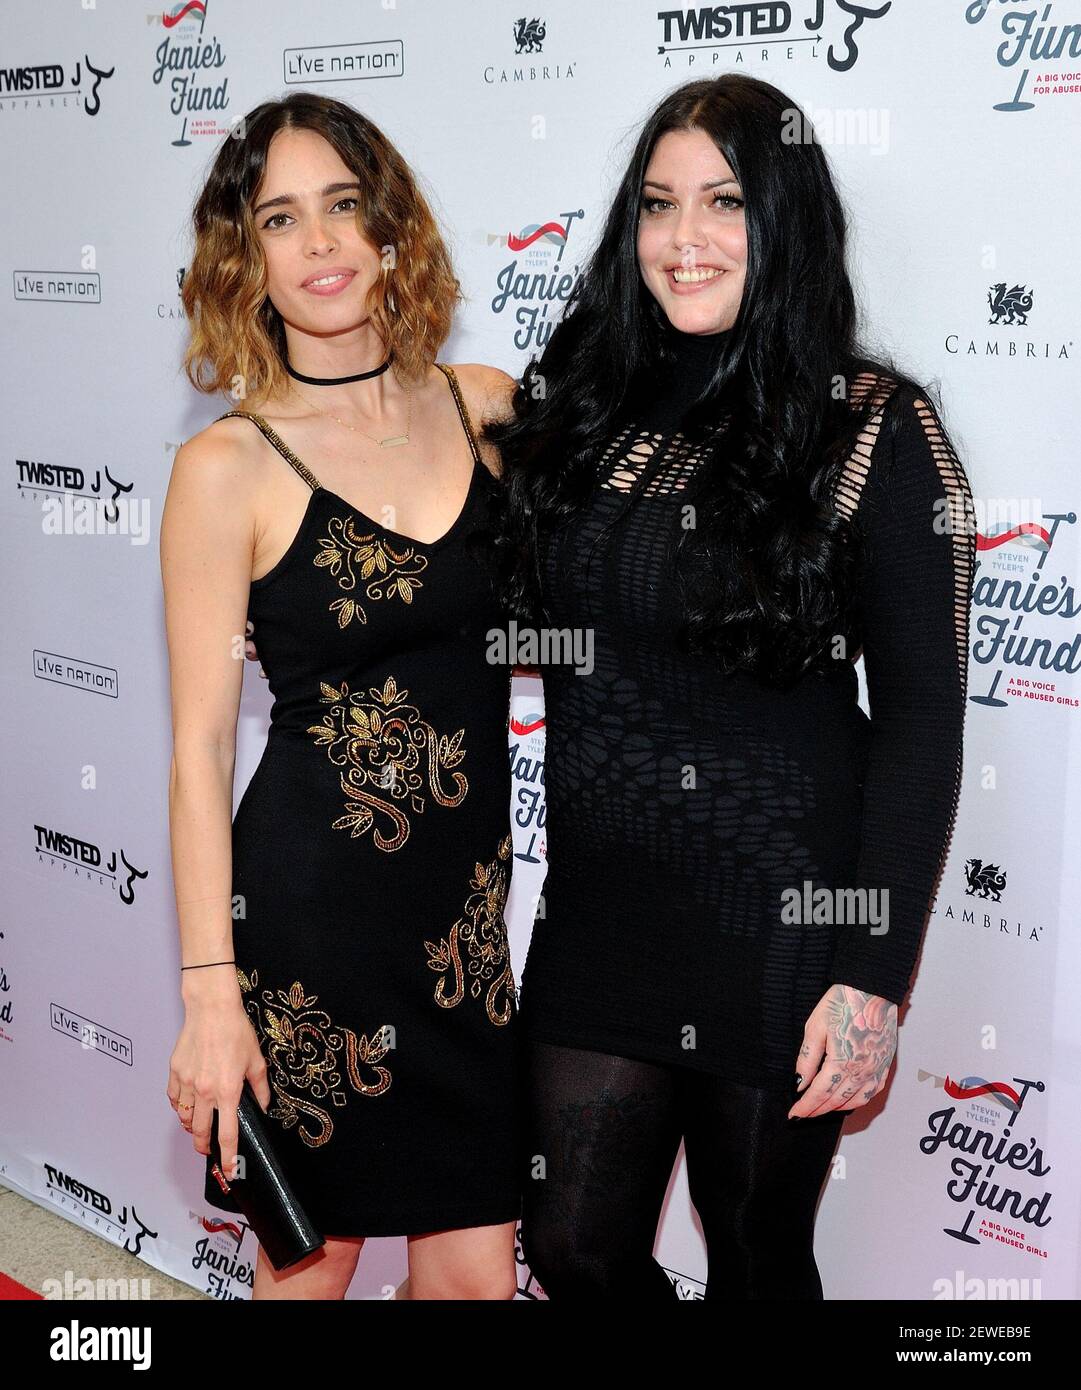 Chelsea and Mia Tyler attend the Steven Tyler...Out on a Limb concert to benefit Janie's Fund at David Geffen Hall at Lincoln Center in New York, NY on May 2, 2016.  ( Stock Photo